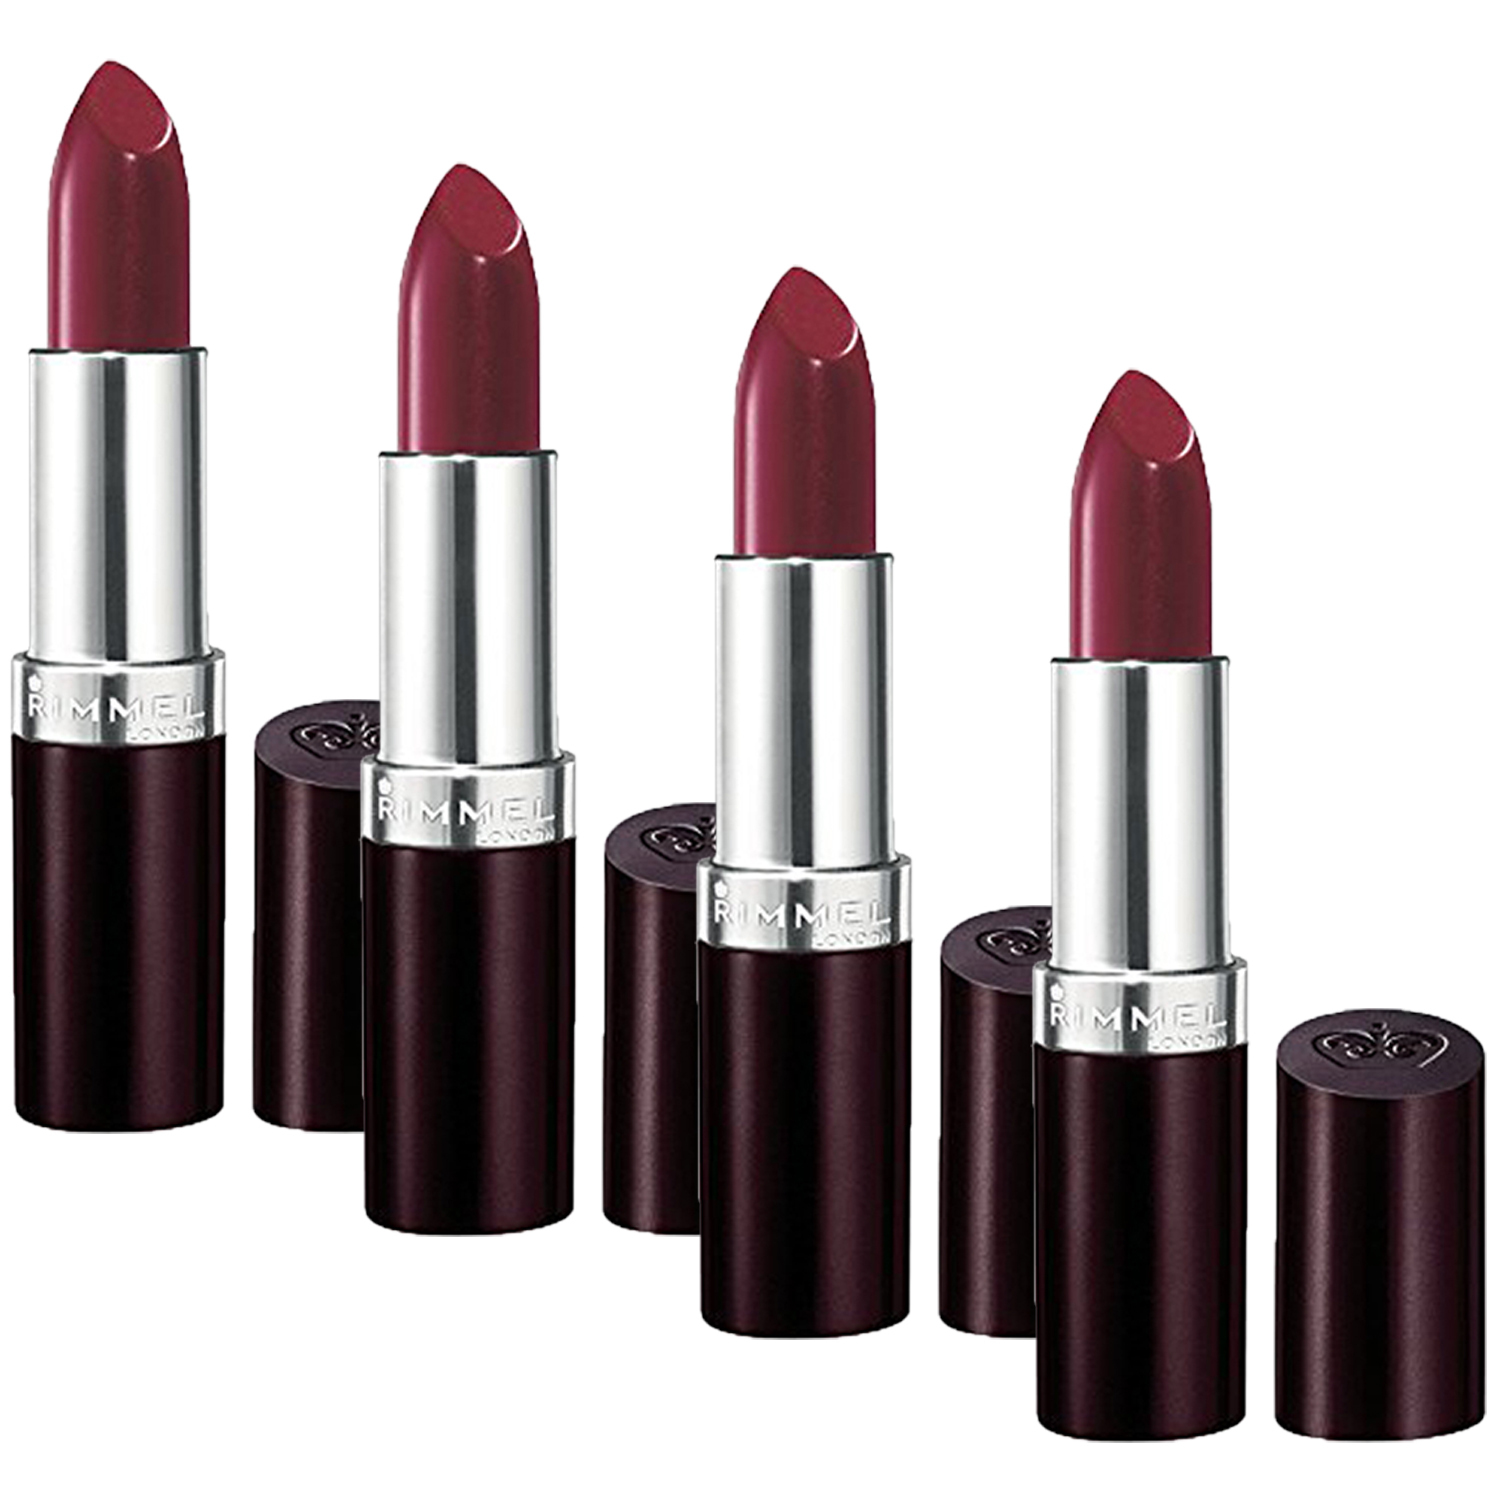 Primary image for Pack of (4) New Rimmel Lasting Finish Lipstick 124 Bordeaux, 0.14 Ounces